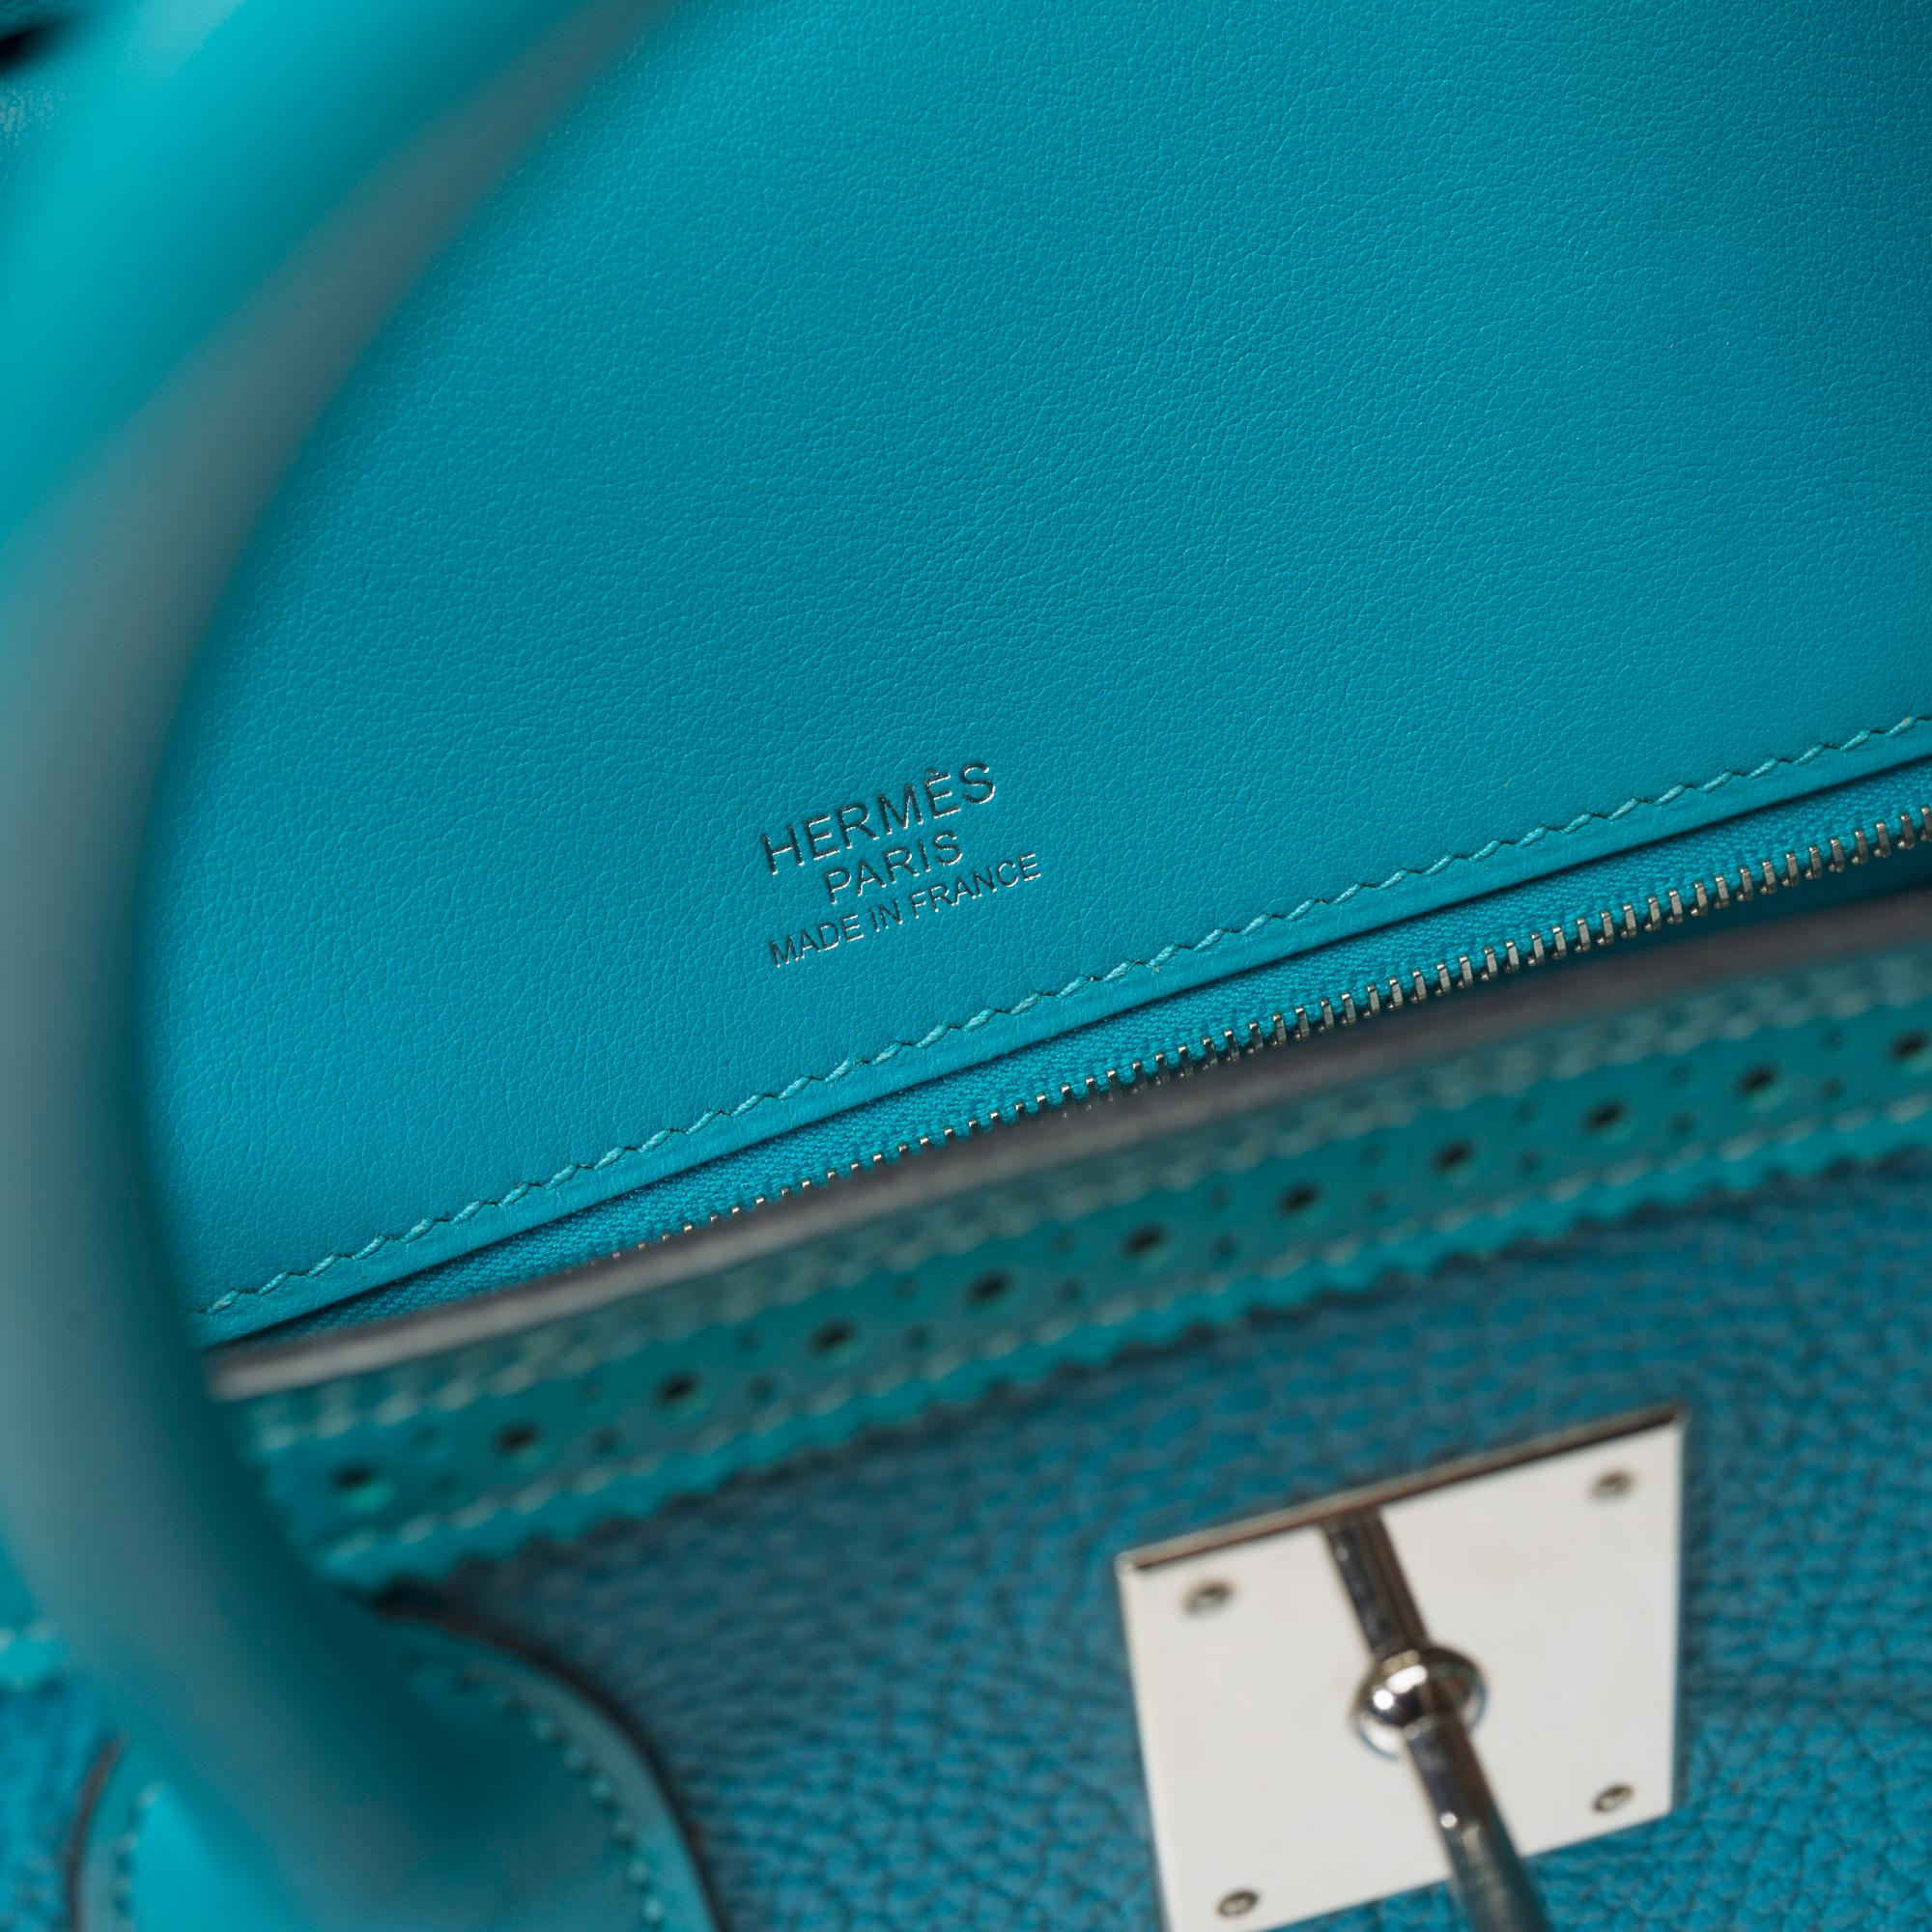 Ghillies Limited Edition Hermes Birkin 30 handbag in Turquoise Blue leather, SHW For Sale 4